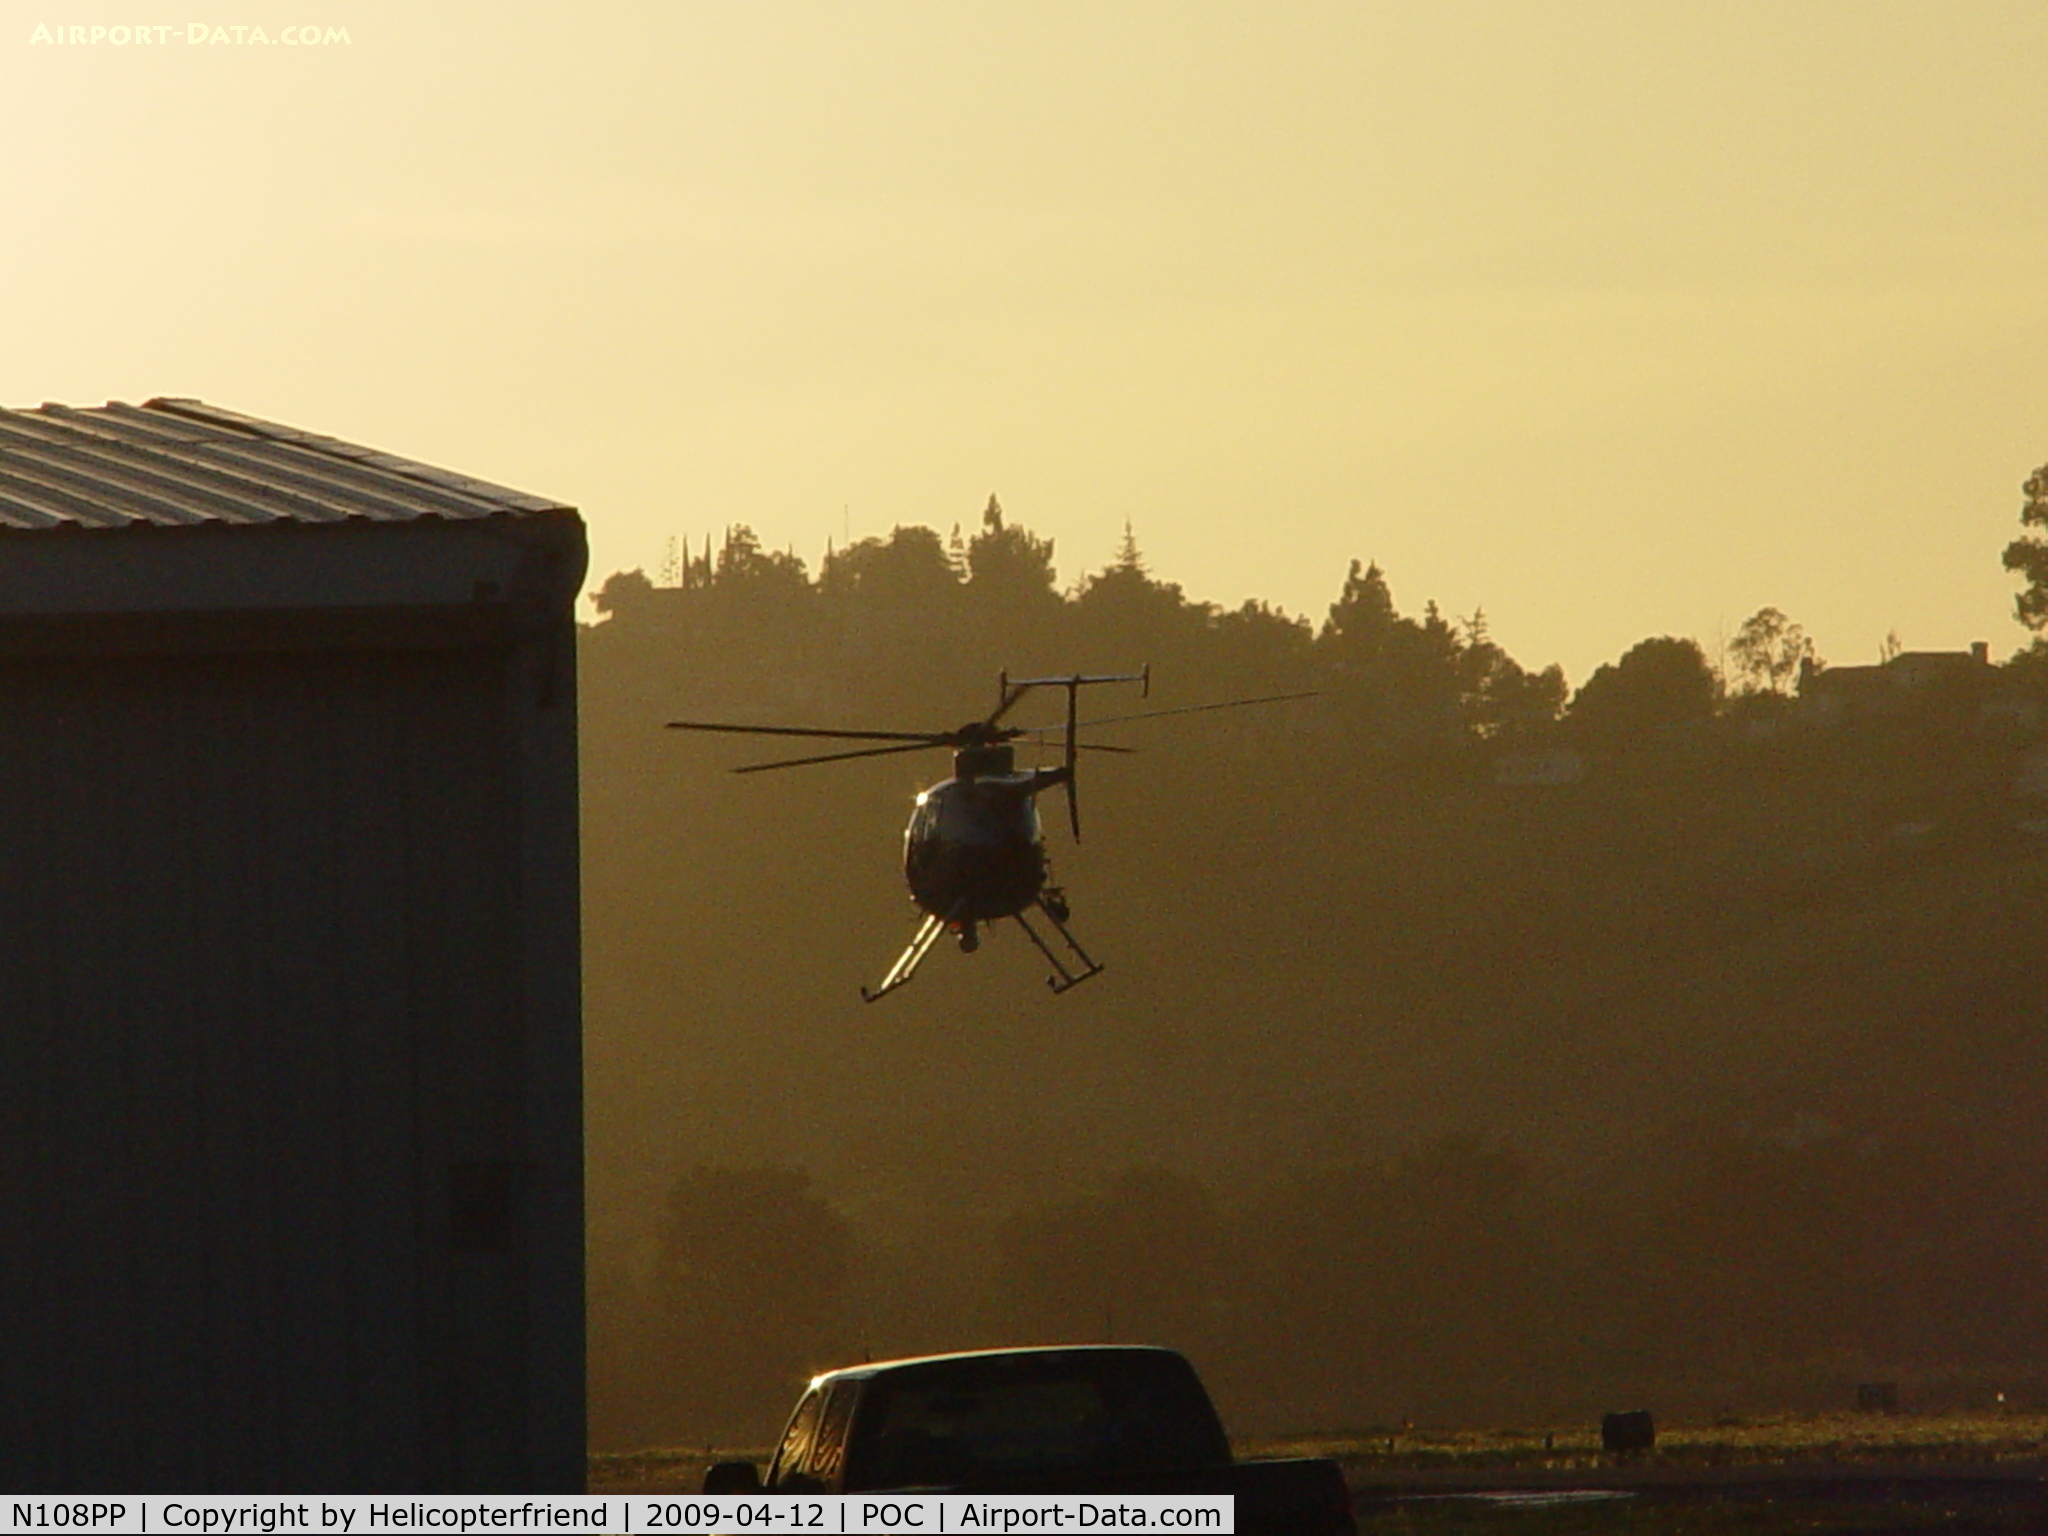 N108PP, 2008 MD Helicopters 369E C/N 0578E, Taking off into the sunset for patrol